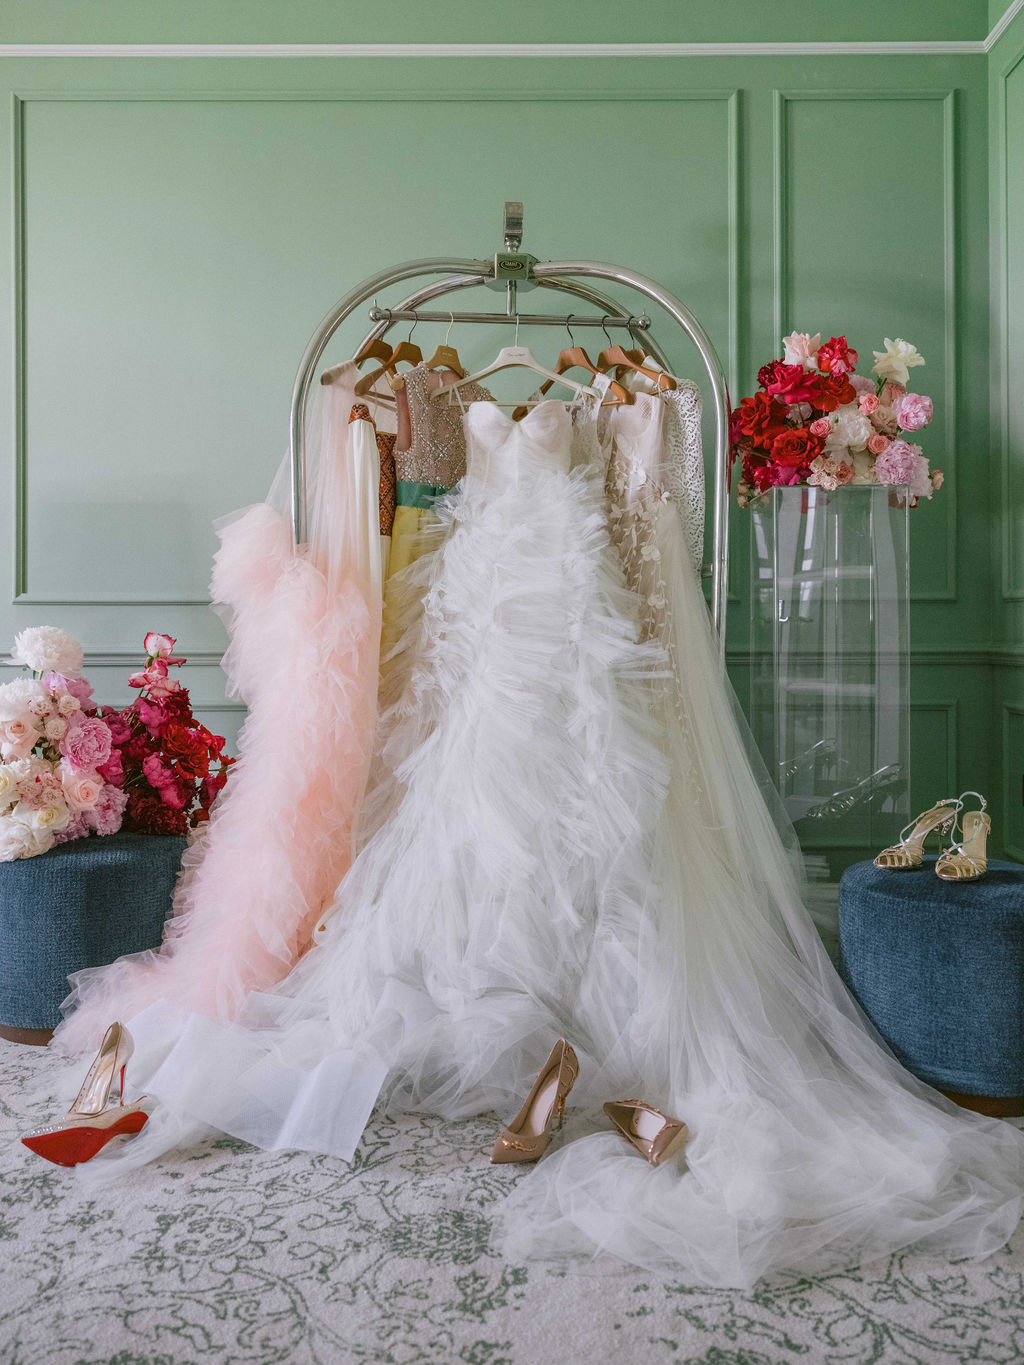 Brides dresses hanging in bridal suite surrounded by flowers